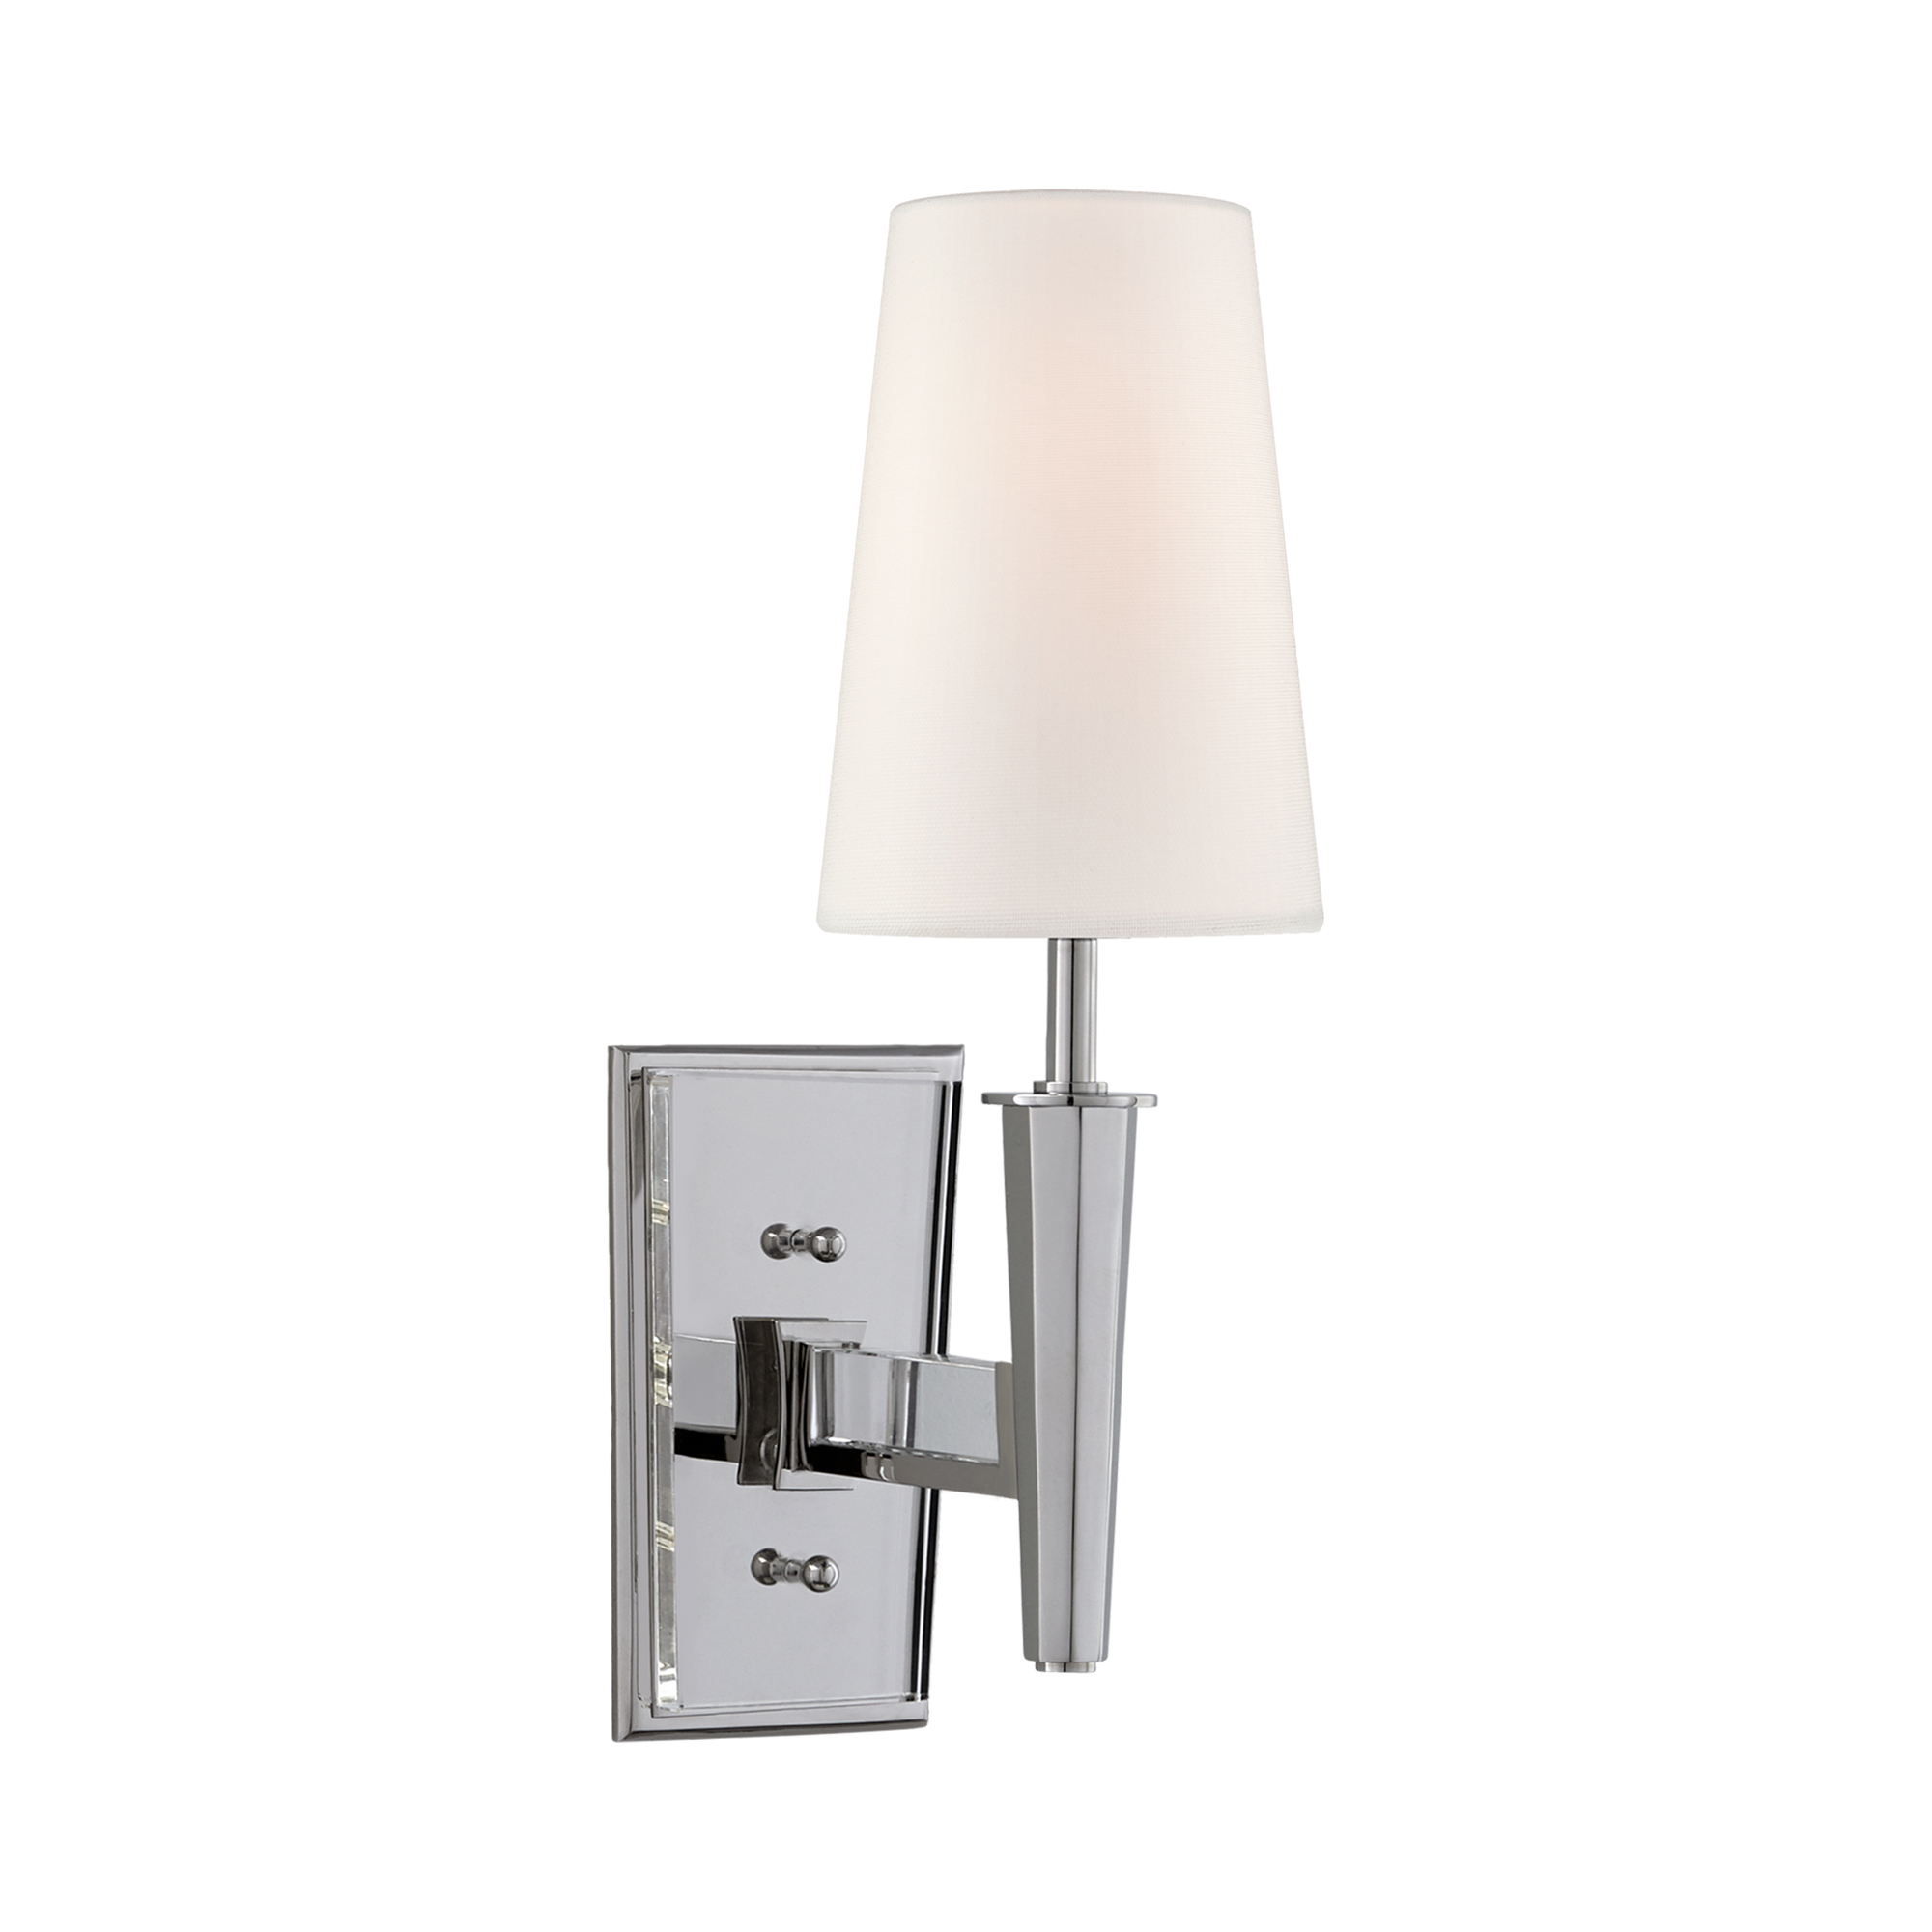 The Lyra Wall Light bridges traditional and modern styles.